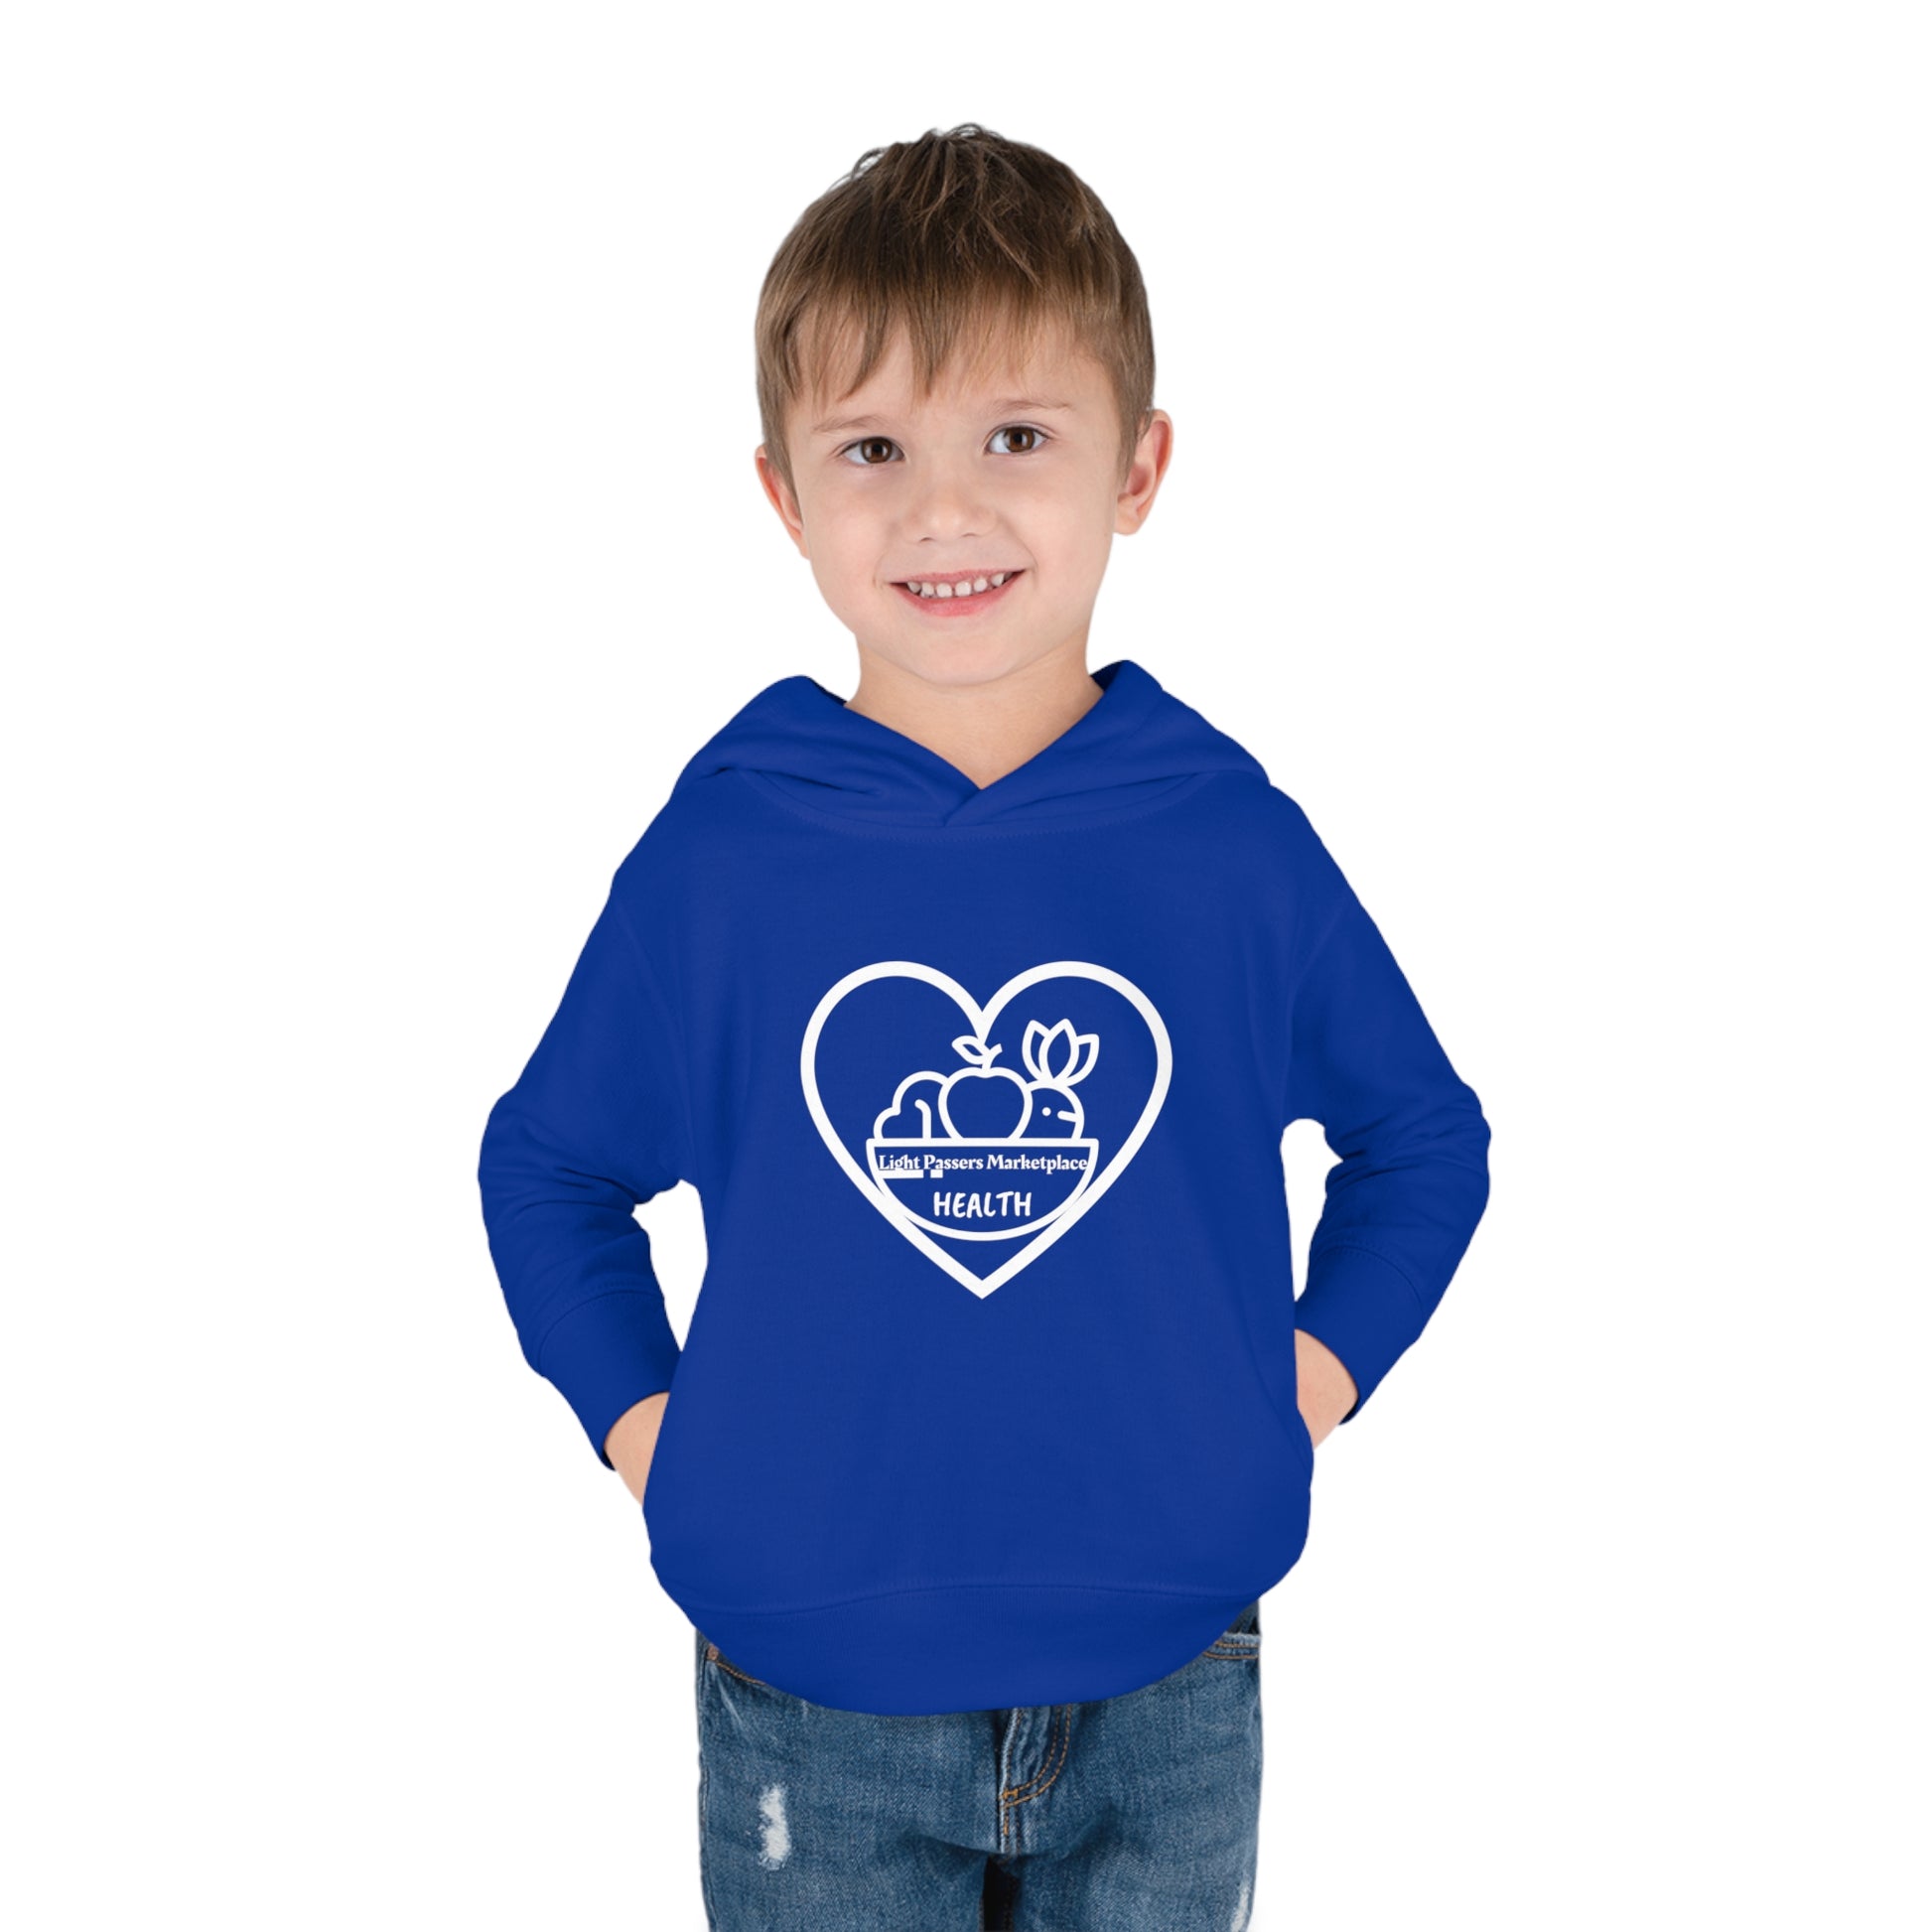 A toddler in a blue sweatshirt with a heart logo, showcasing side seam pockets and cover-stitched details for durability and comfort. Fruit Basket Toddler Hoodie in 60% cotton, 40% polyester blend.